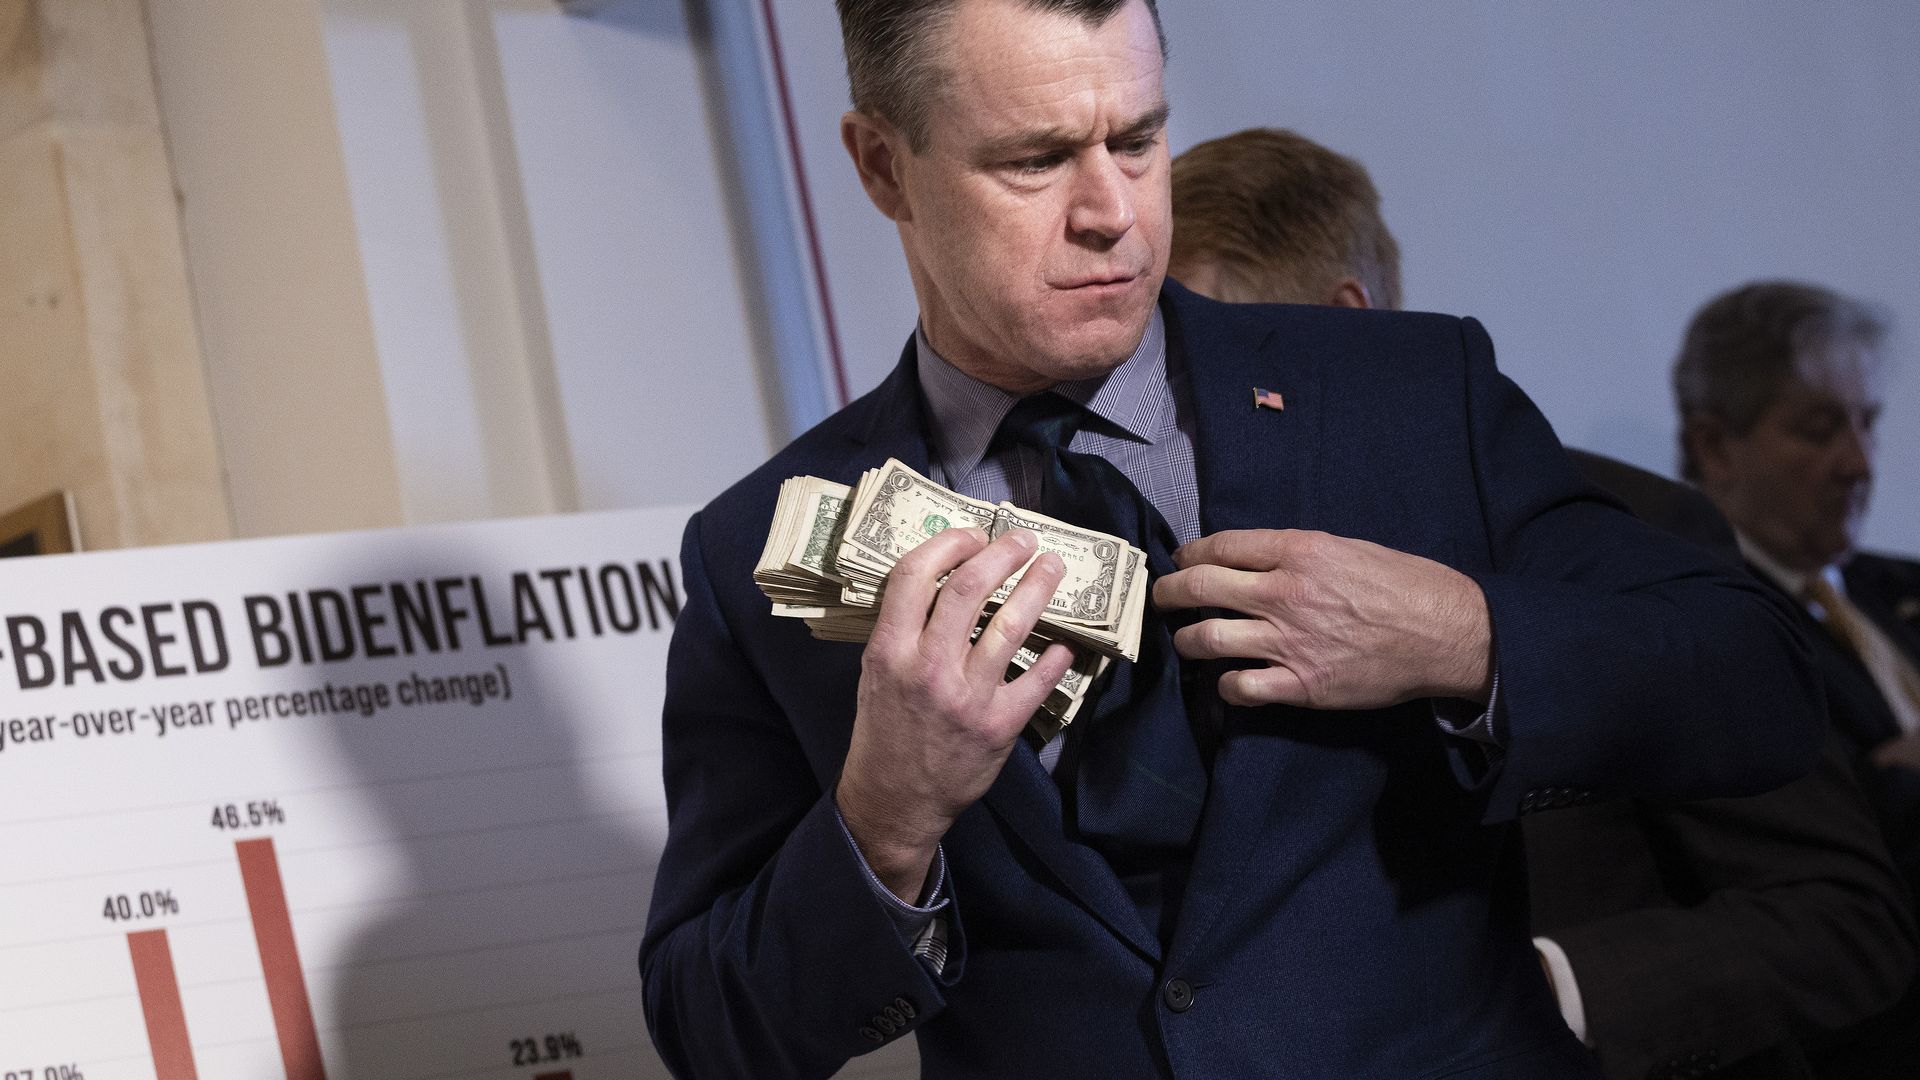 A senator is seen stuffing cash in his suit coat during a press conference to protest inflation.